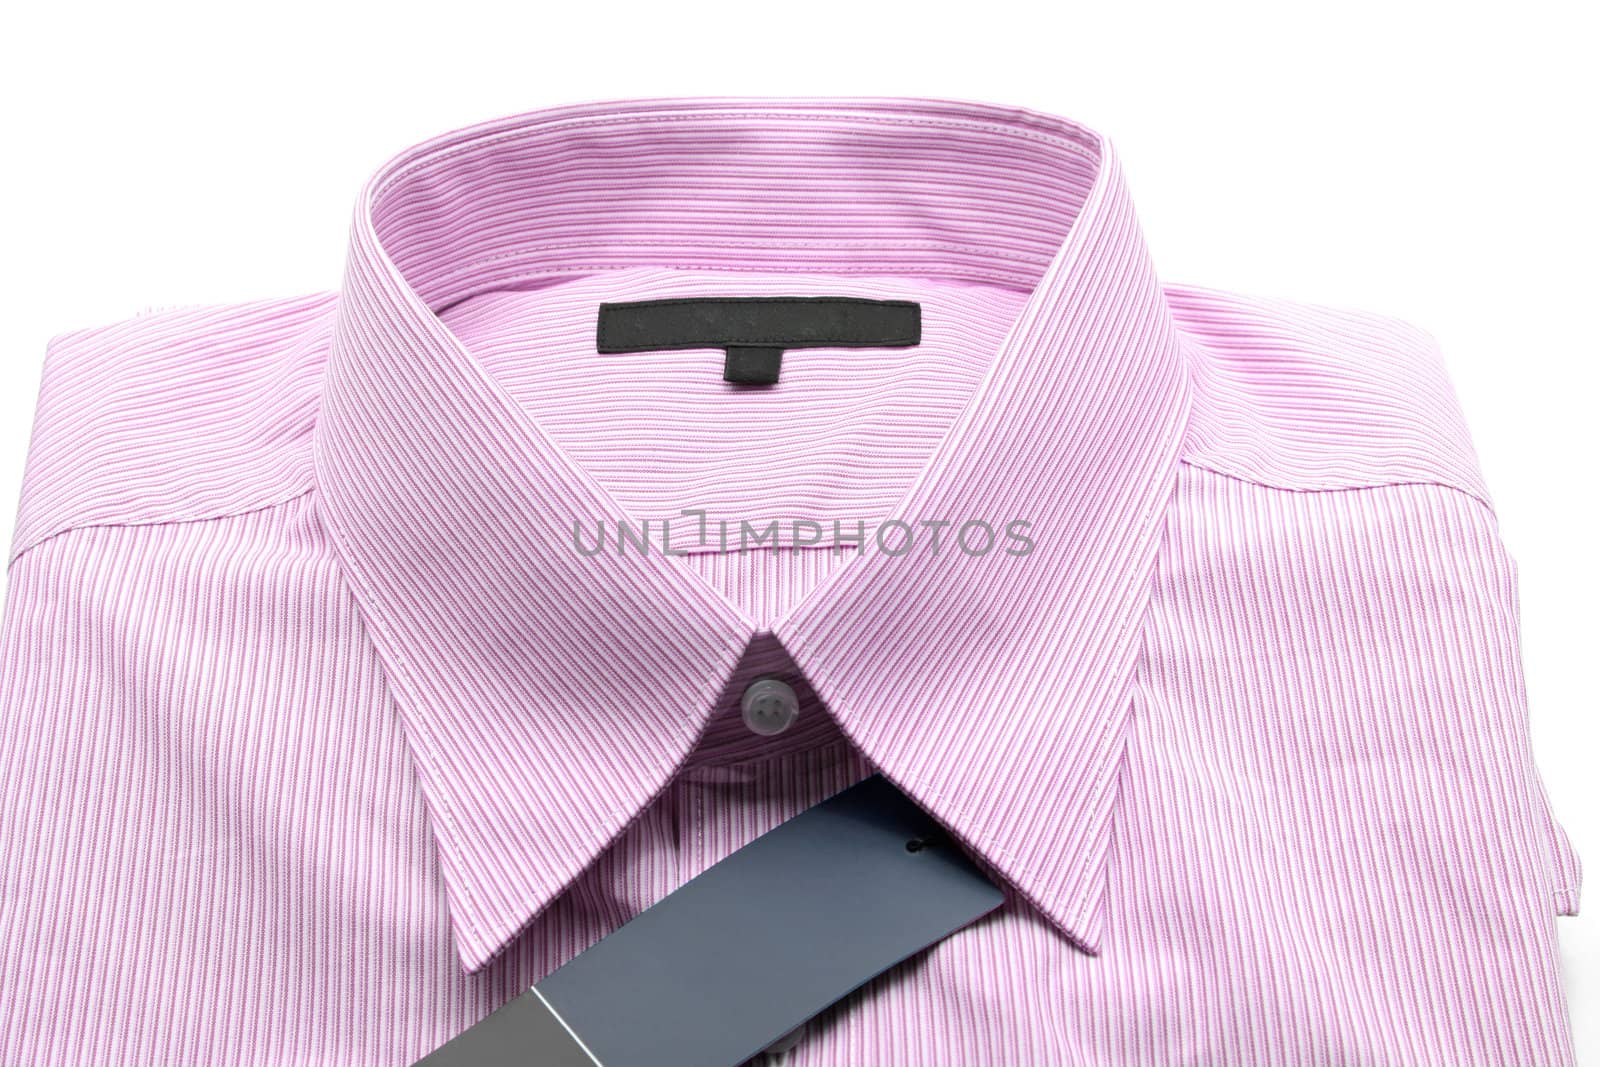 generic line pattern red business shirt with a blank label